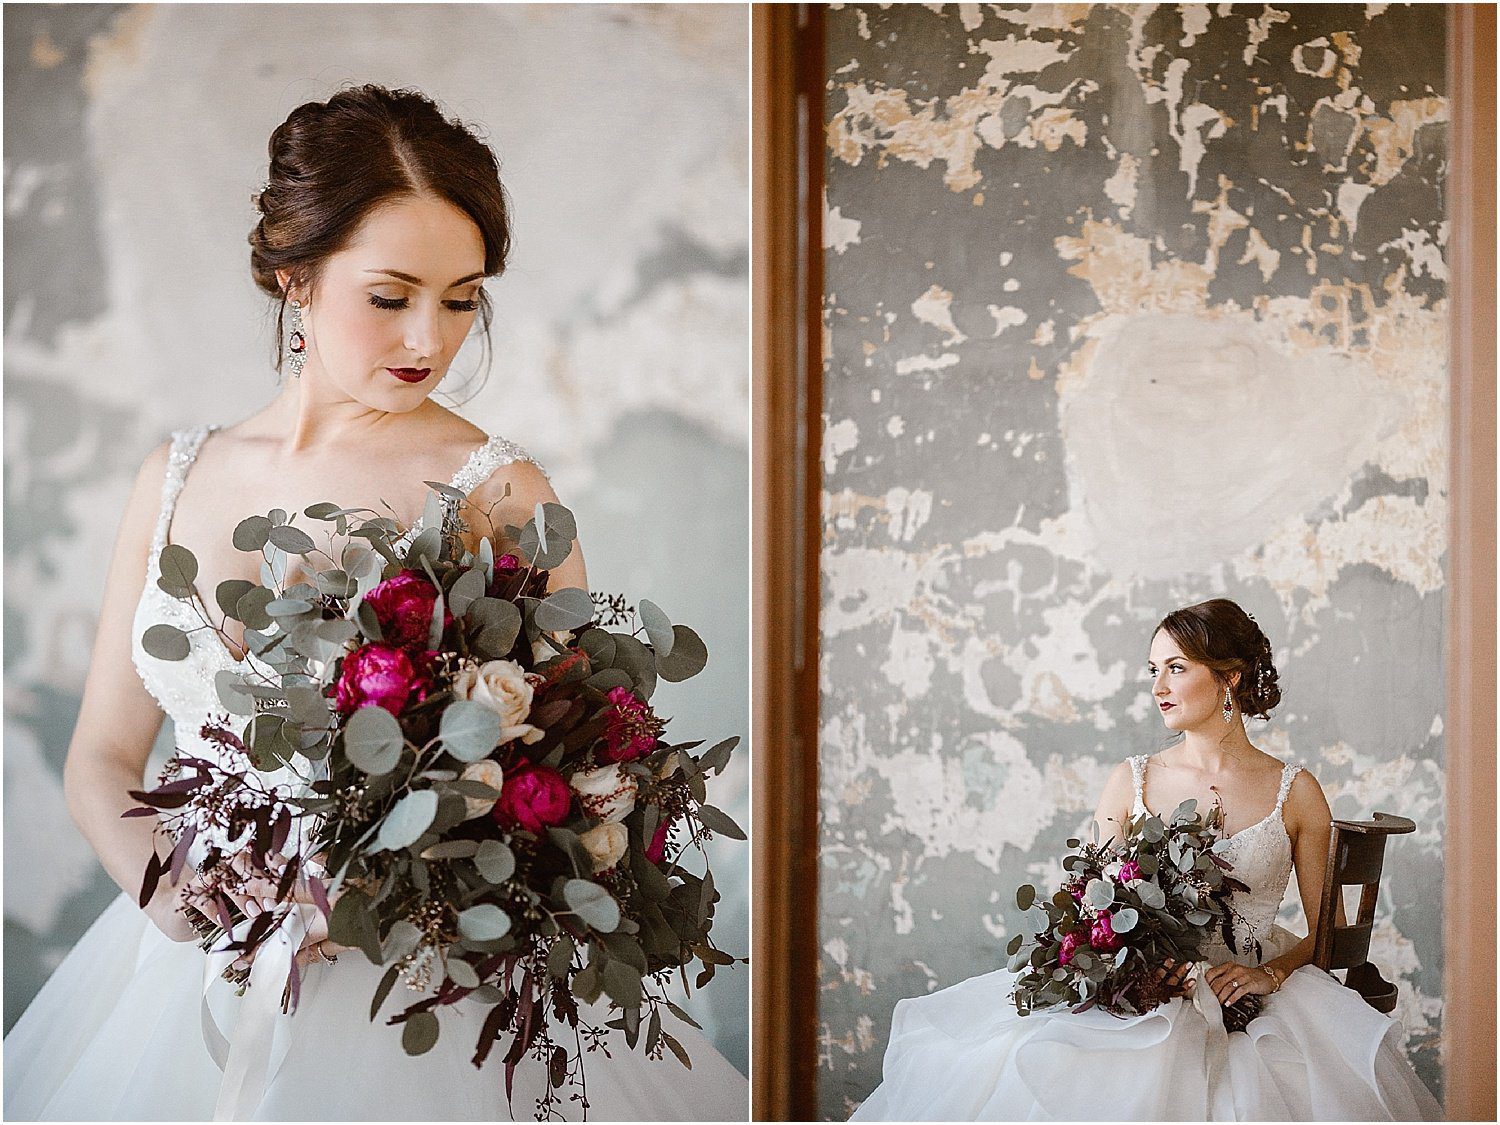 Bridal Photos at The Standard Knoxville by Erin Morrison Photography